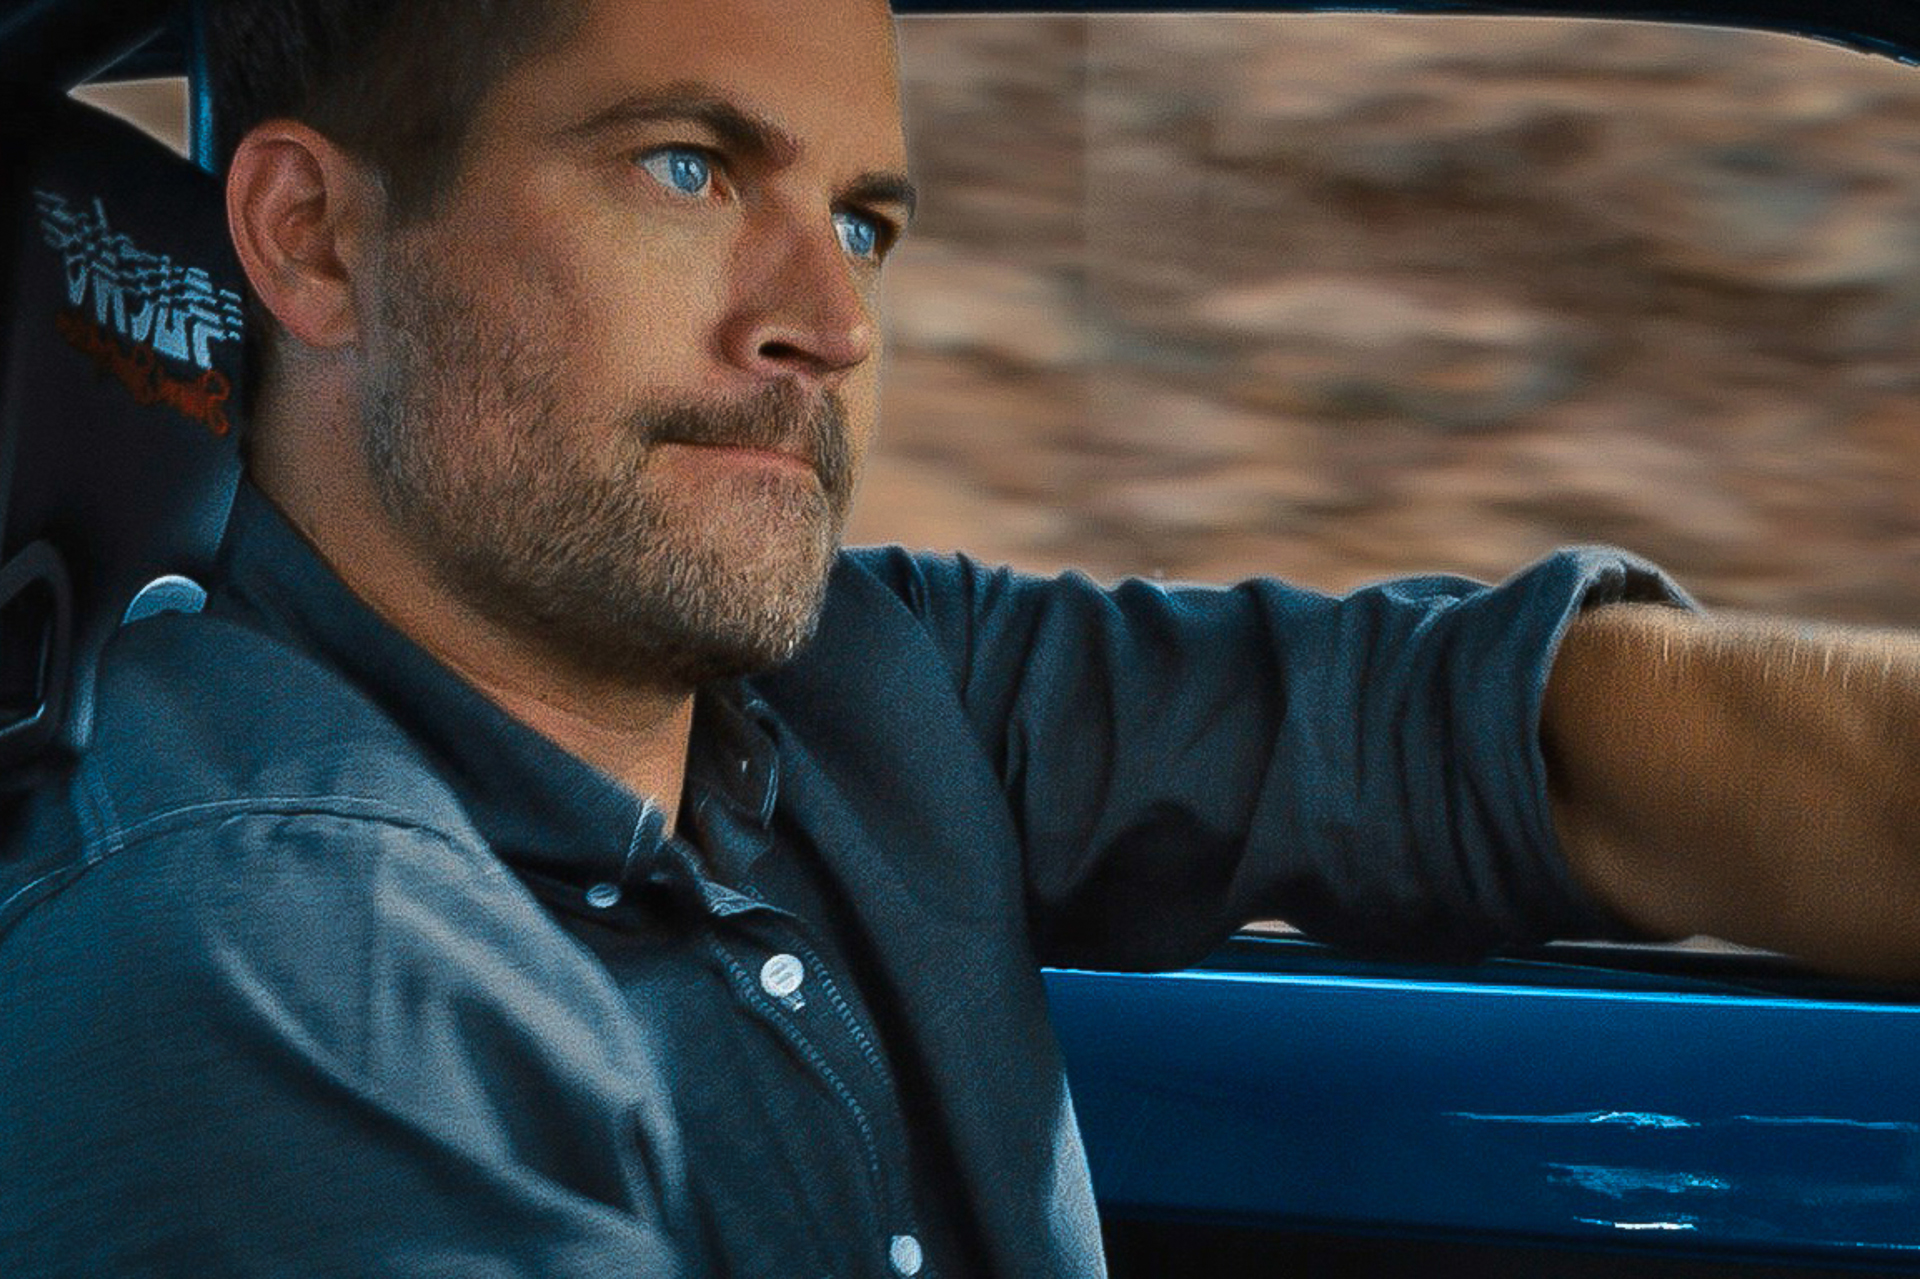  Paul Walker Wallpapers HD New Android क लए APK डउनलड कर